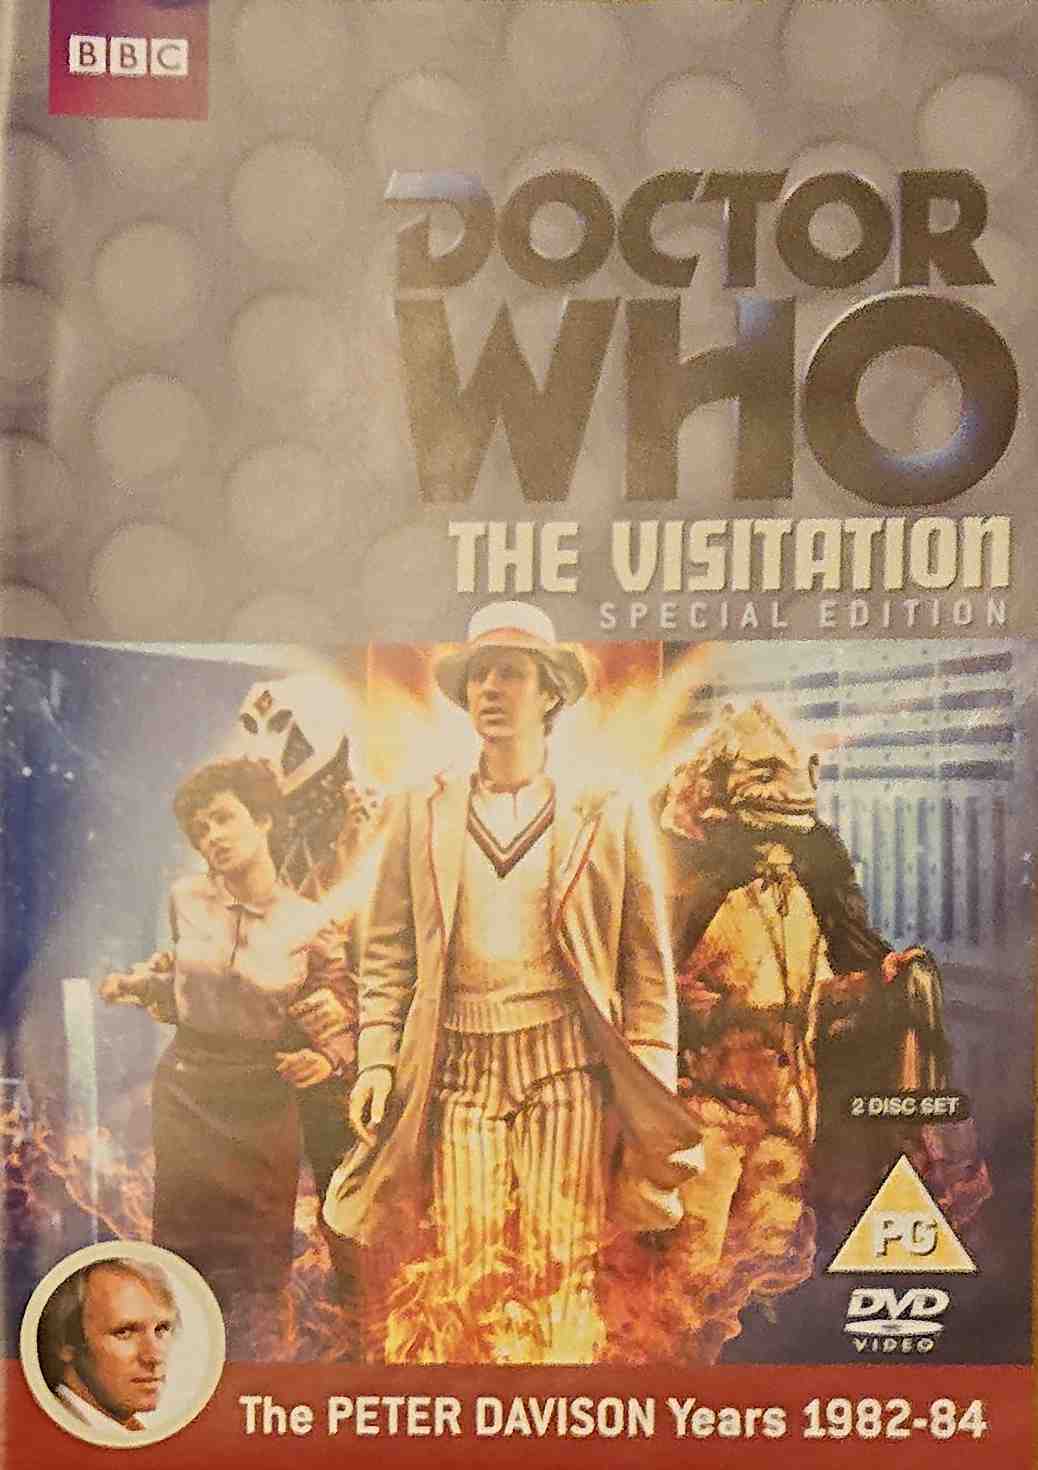 Picture of Doctor Who - The visitation by artist Eric Saward from the BBC dvds - Records and Tapes library